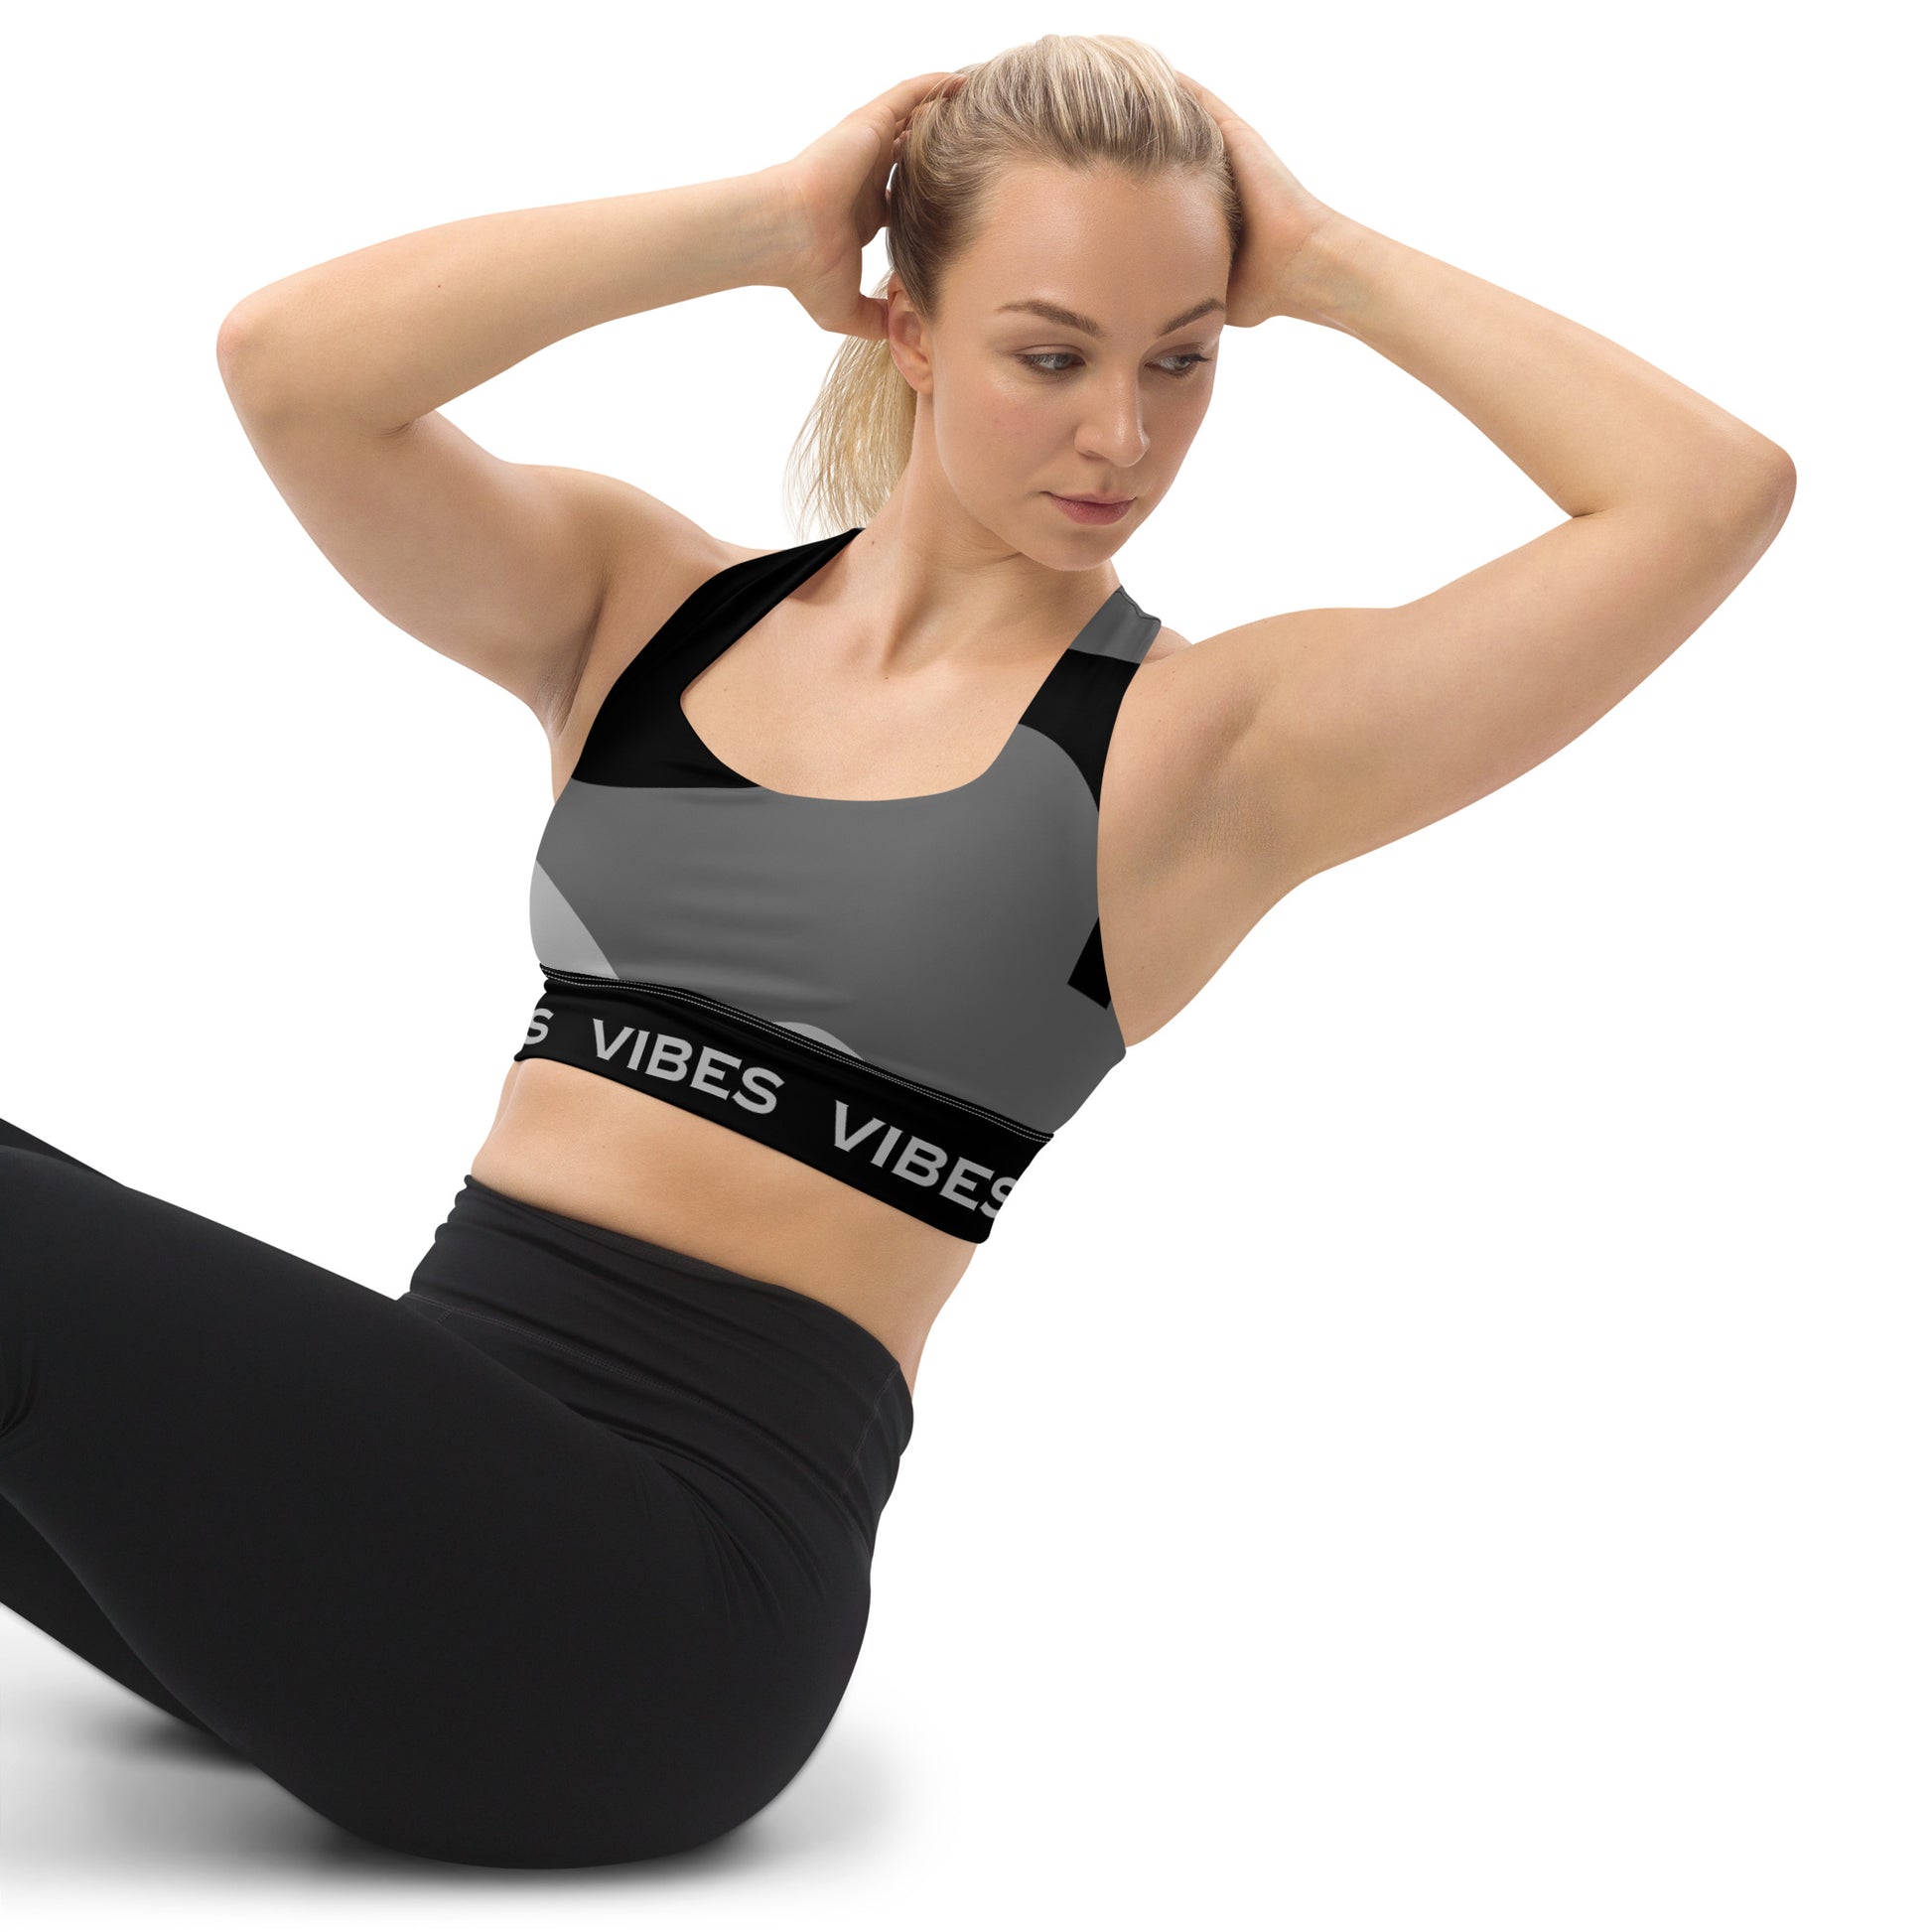 TIME OF VIBES - Longline sports bra ABSTRACT (Grey) - €49.00